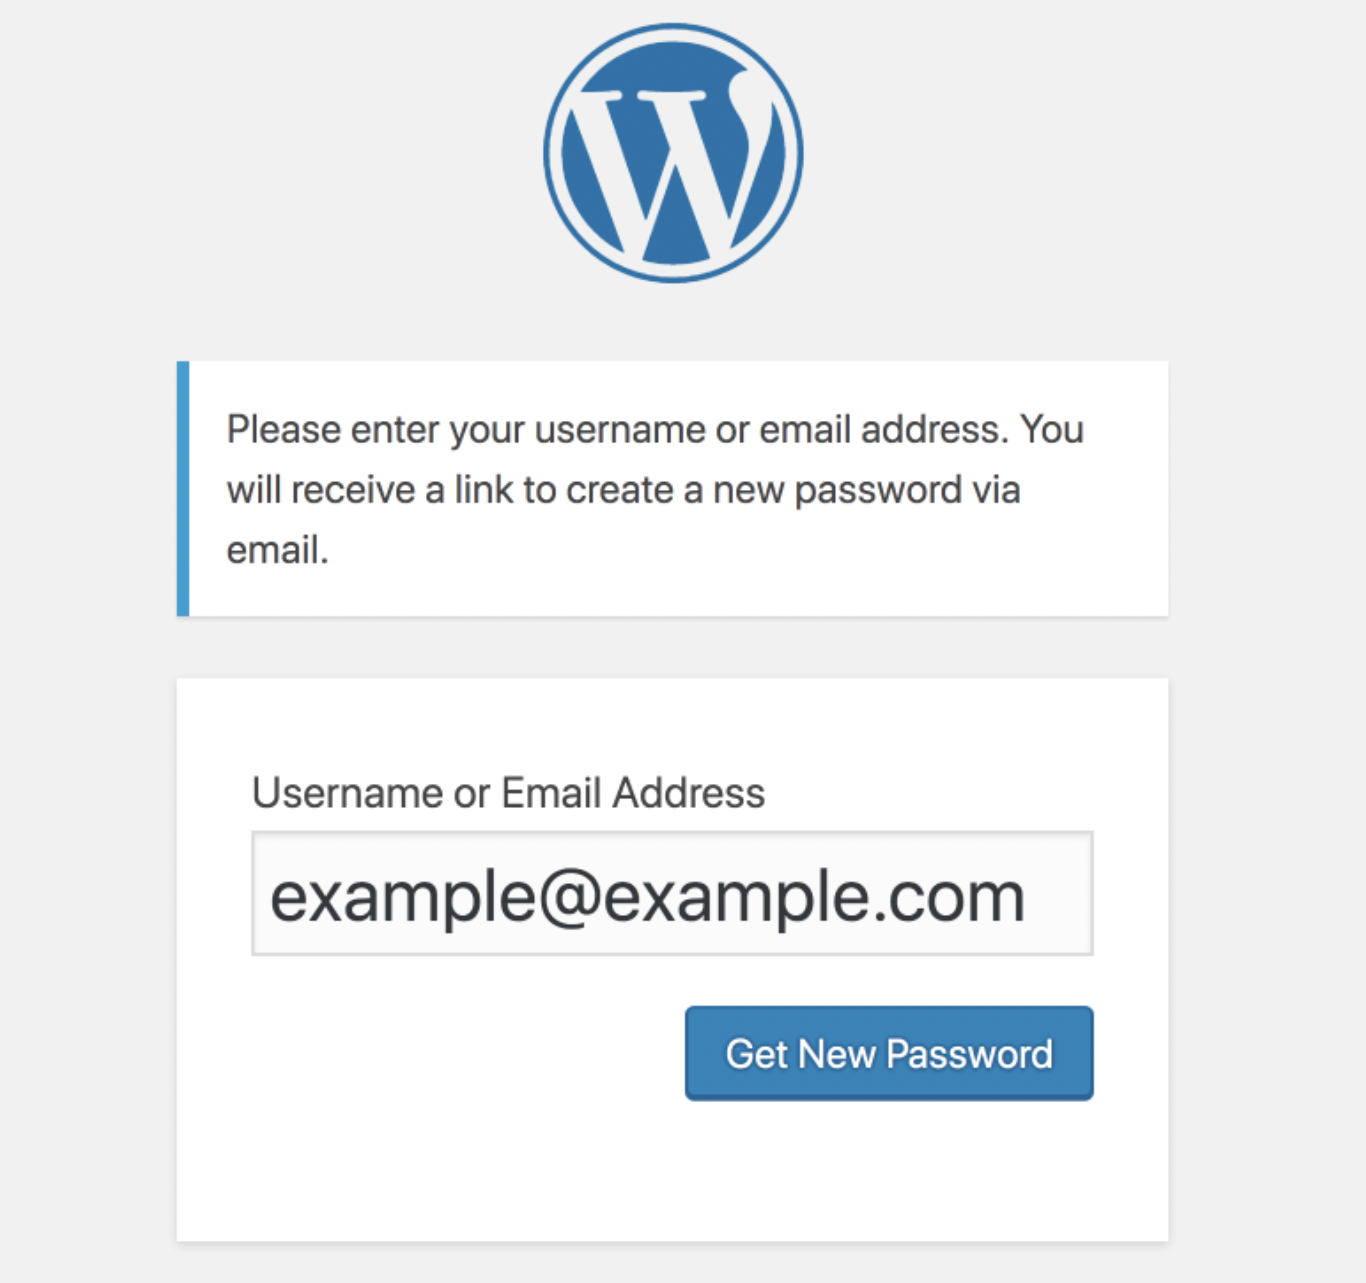 This image is showing the Get New Password option in WordPress